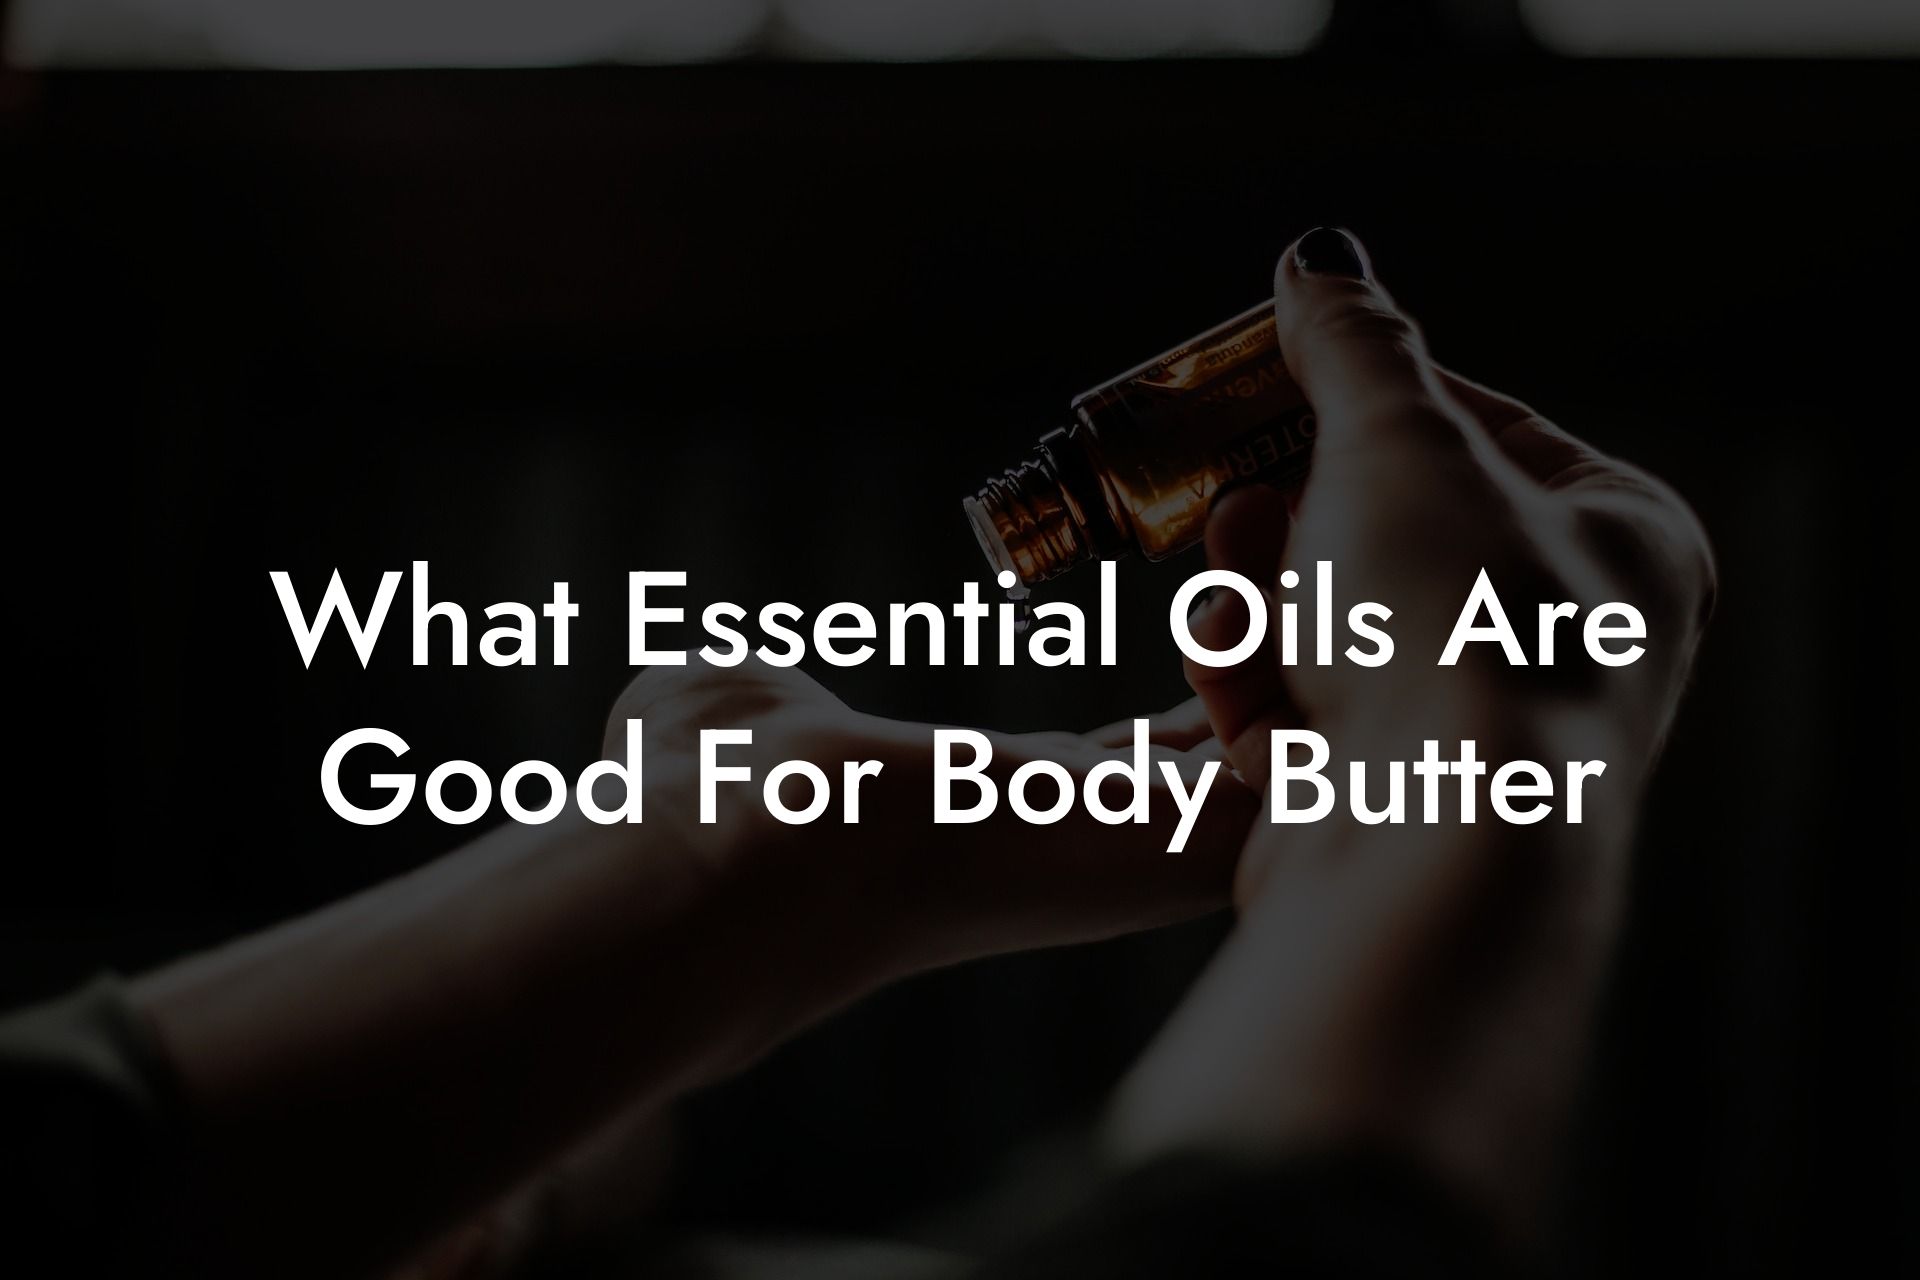 What Essential Oils Are Good For Body Butter